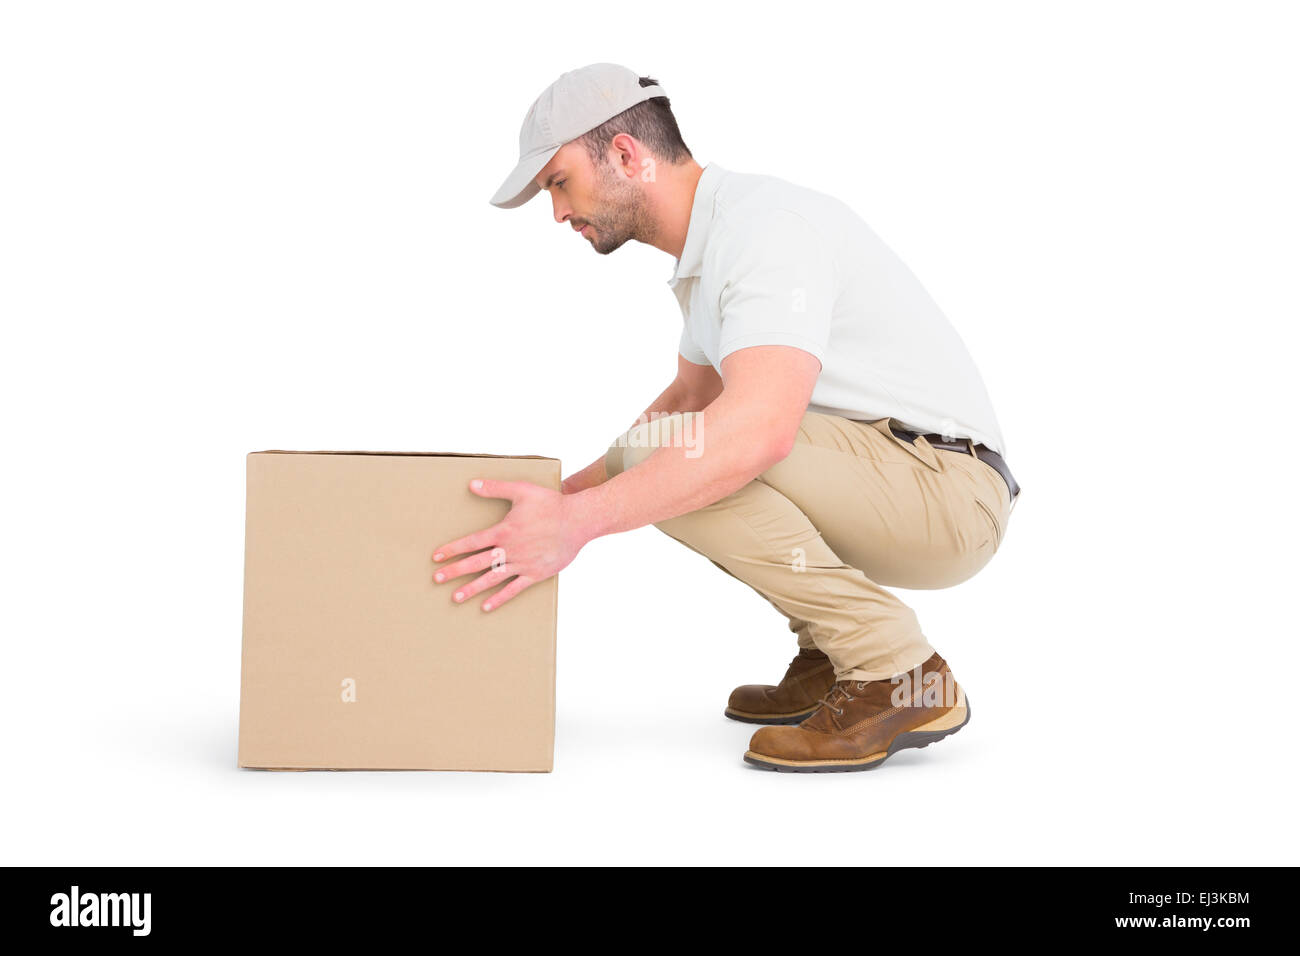 Delivery man crouching while picking cardboard box Stock Photo